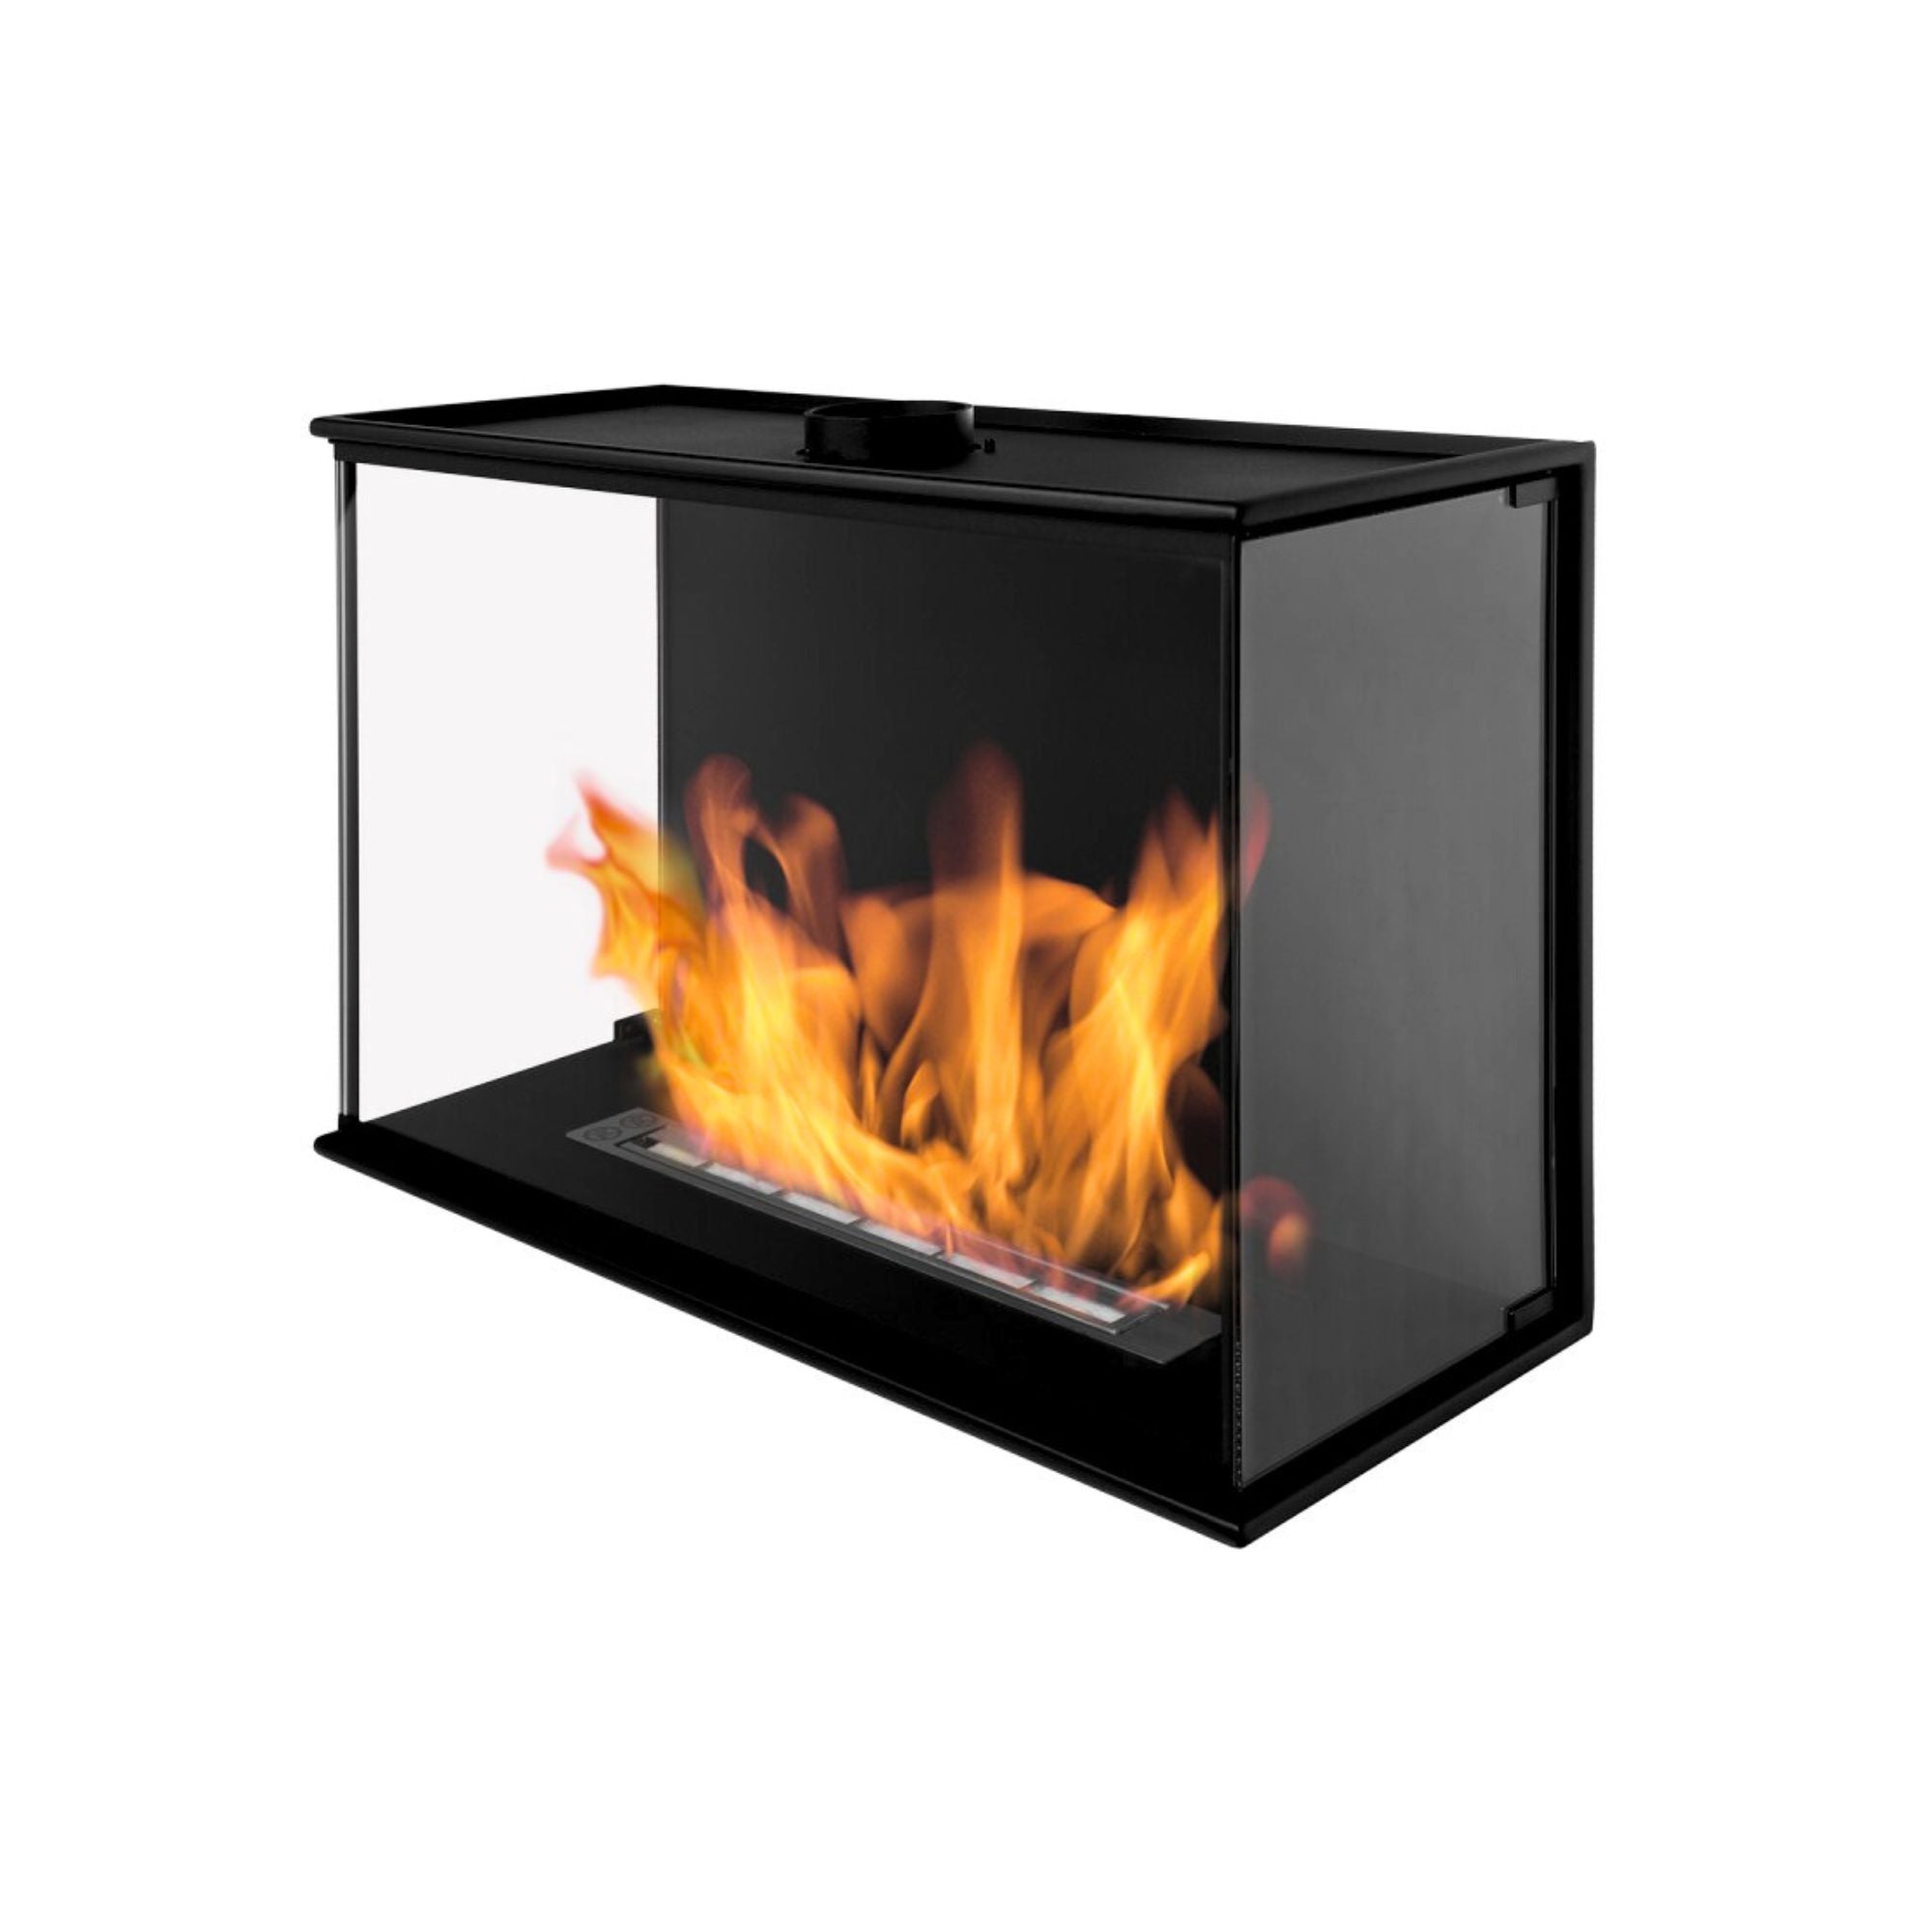 Three-sided Bio Ethanol Built-in Fireplace 80 CM With Full Glass